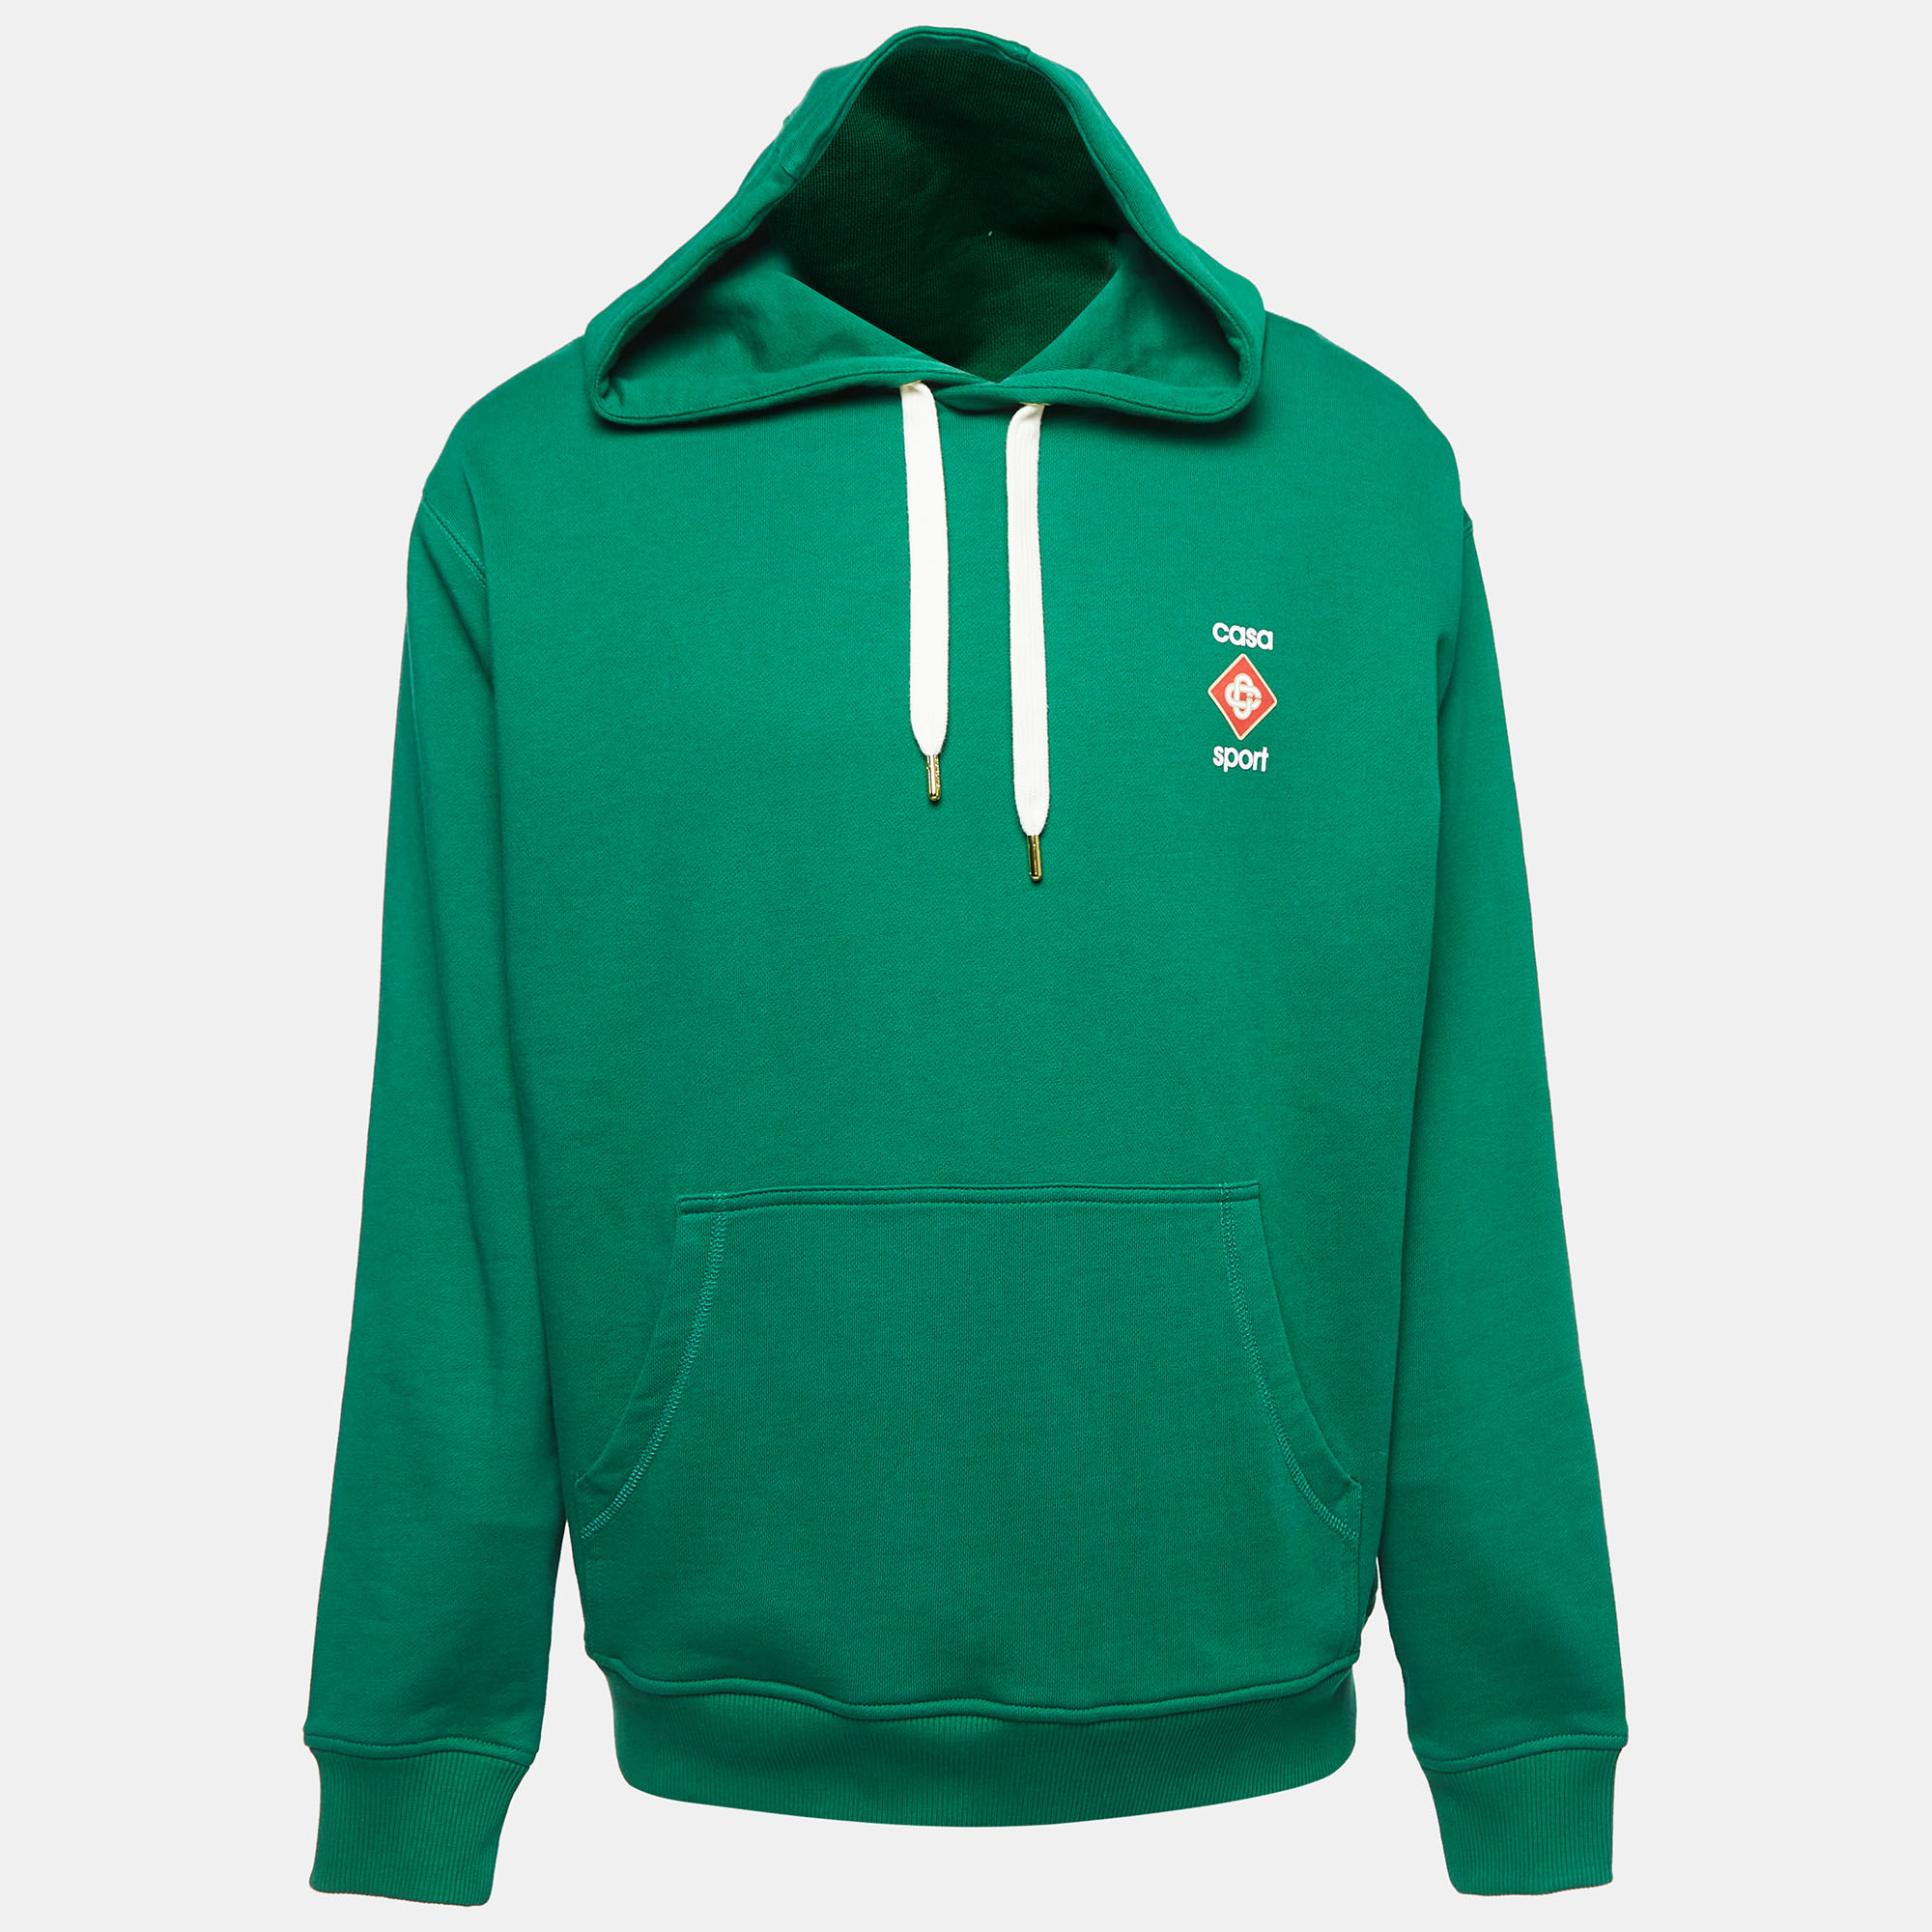 Embrace comfort and style with the Casablanca hoodie. Crafted from premium organic cotton this hoodie exudes eco conscious sophistication. Its vibrant green hue and sleek logo print effortlessly blend sporty aesthetics with casual charm ensuring you stay cozy and fashionable on or off the court.